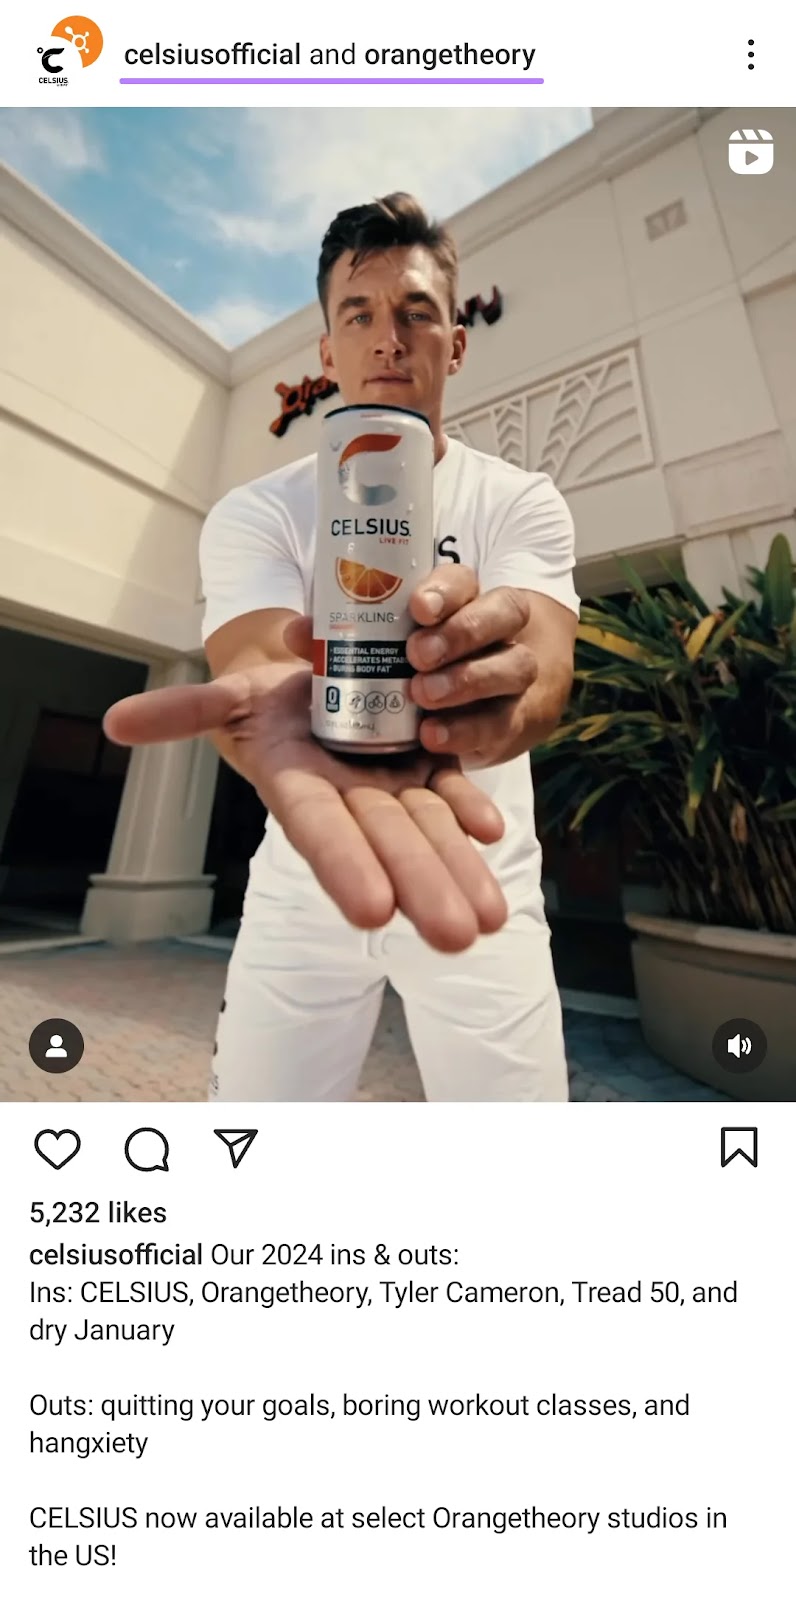 Celsius Instagram reel featuring a cross-promotion with Orangetheory